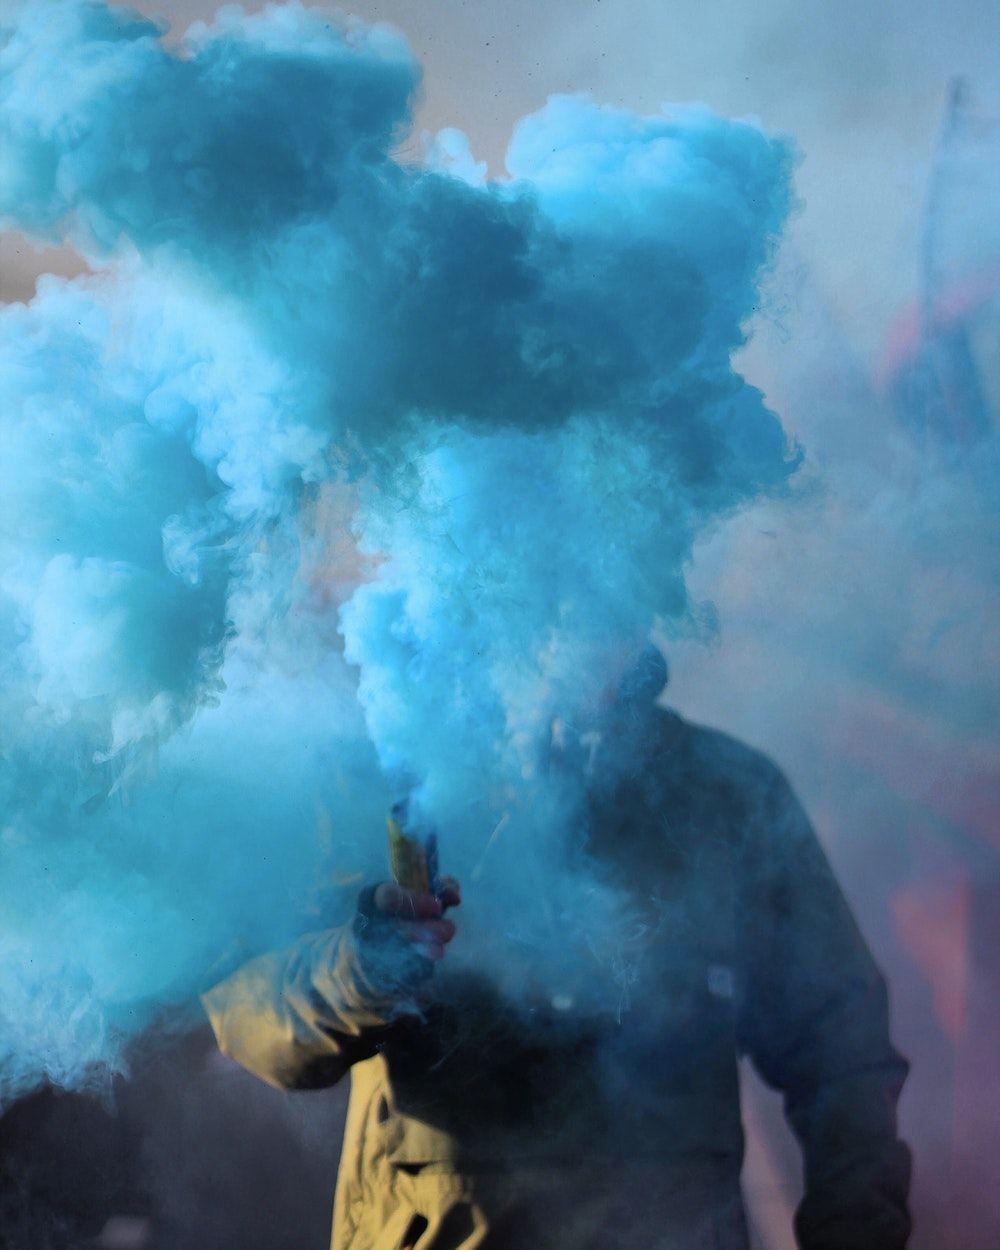 Smoke Bomb Picture. Download Free Image